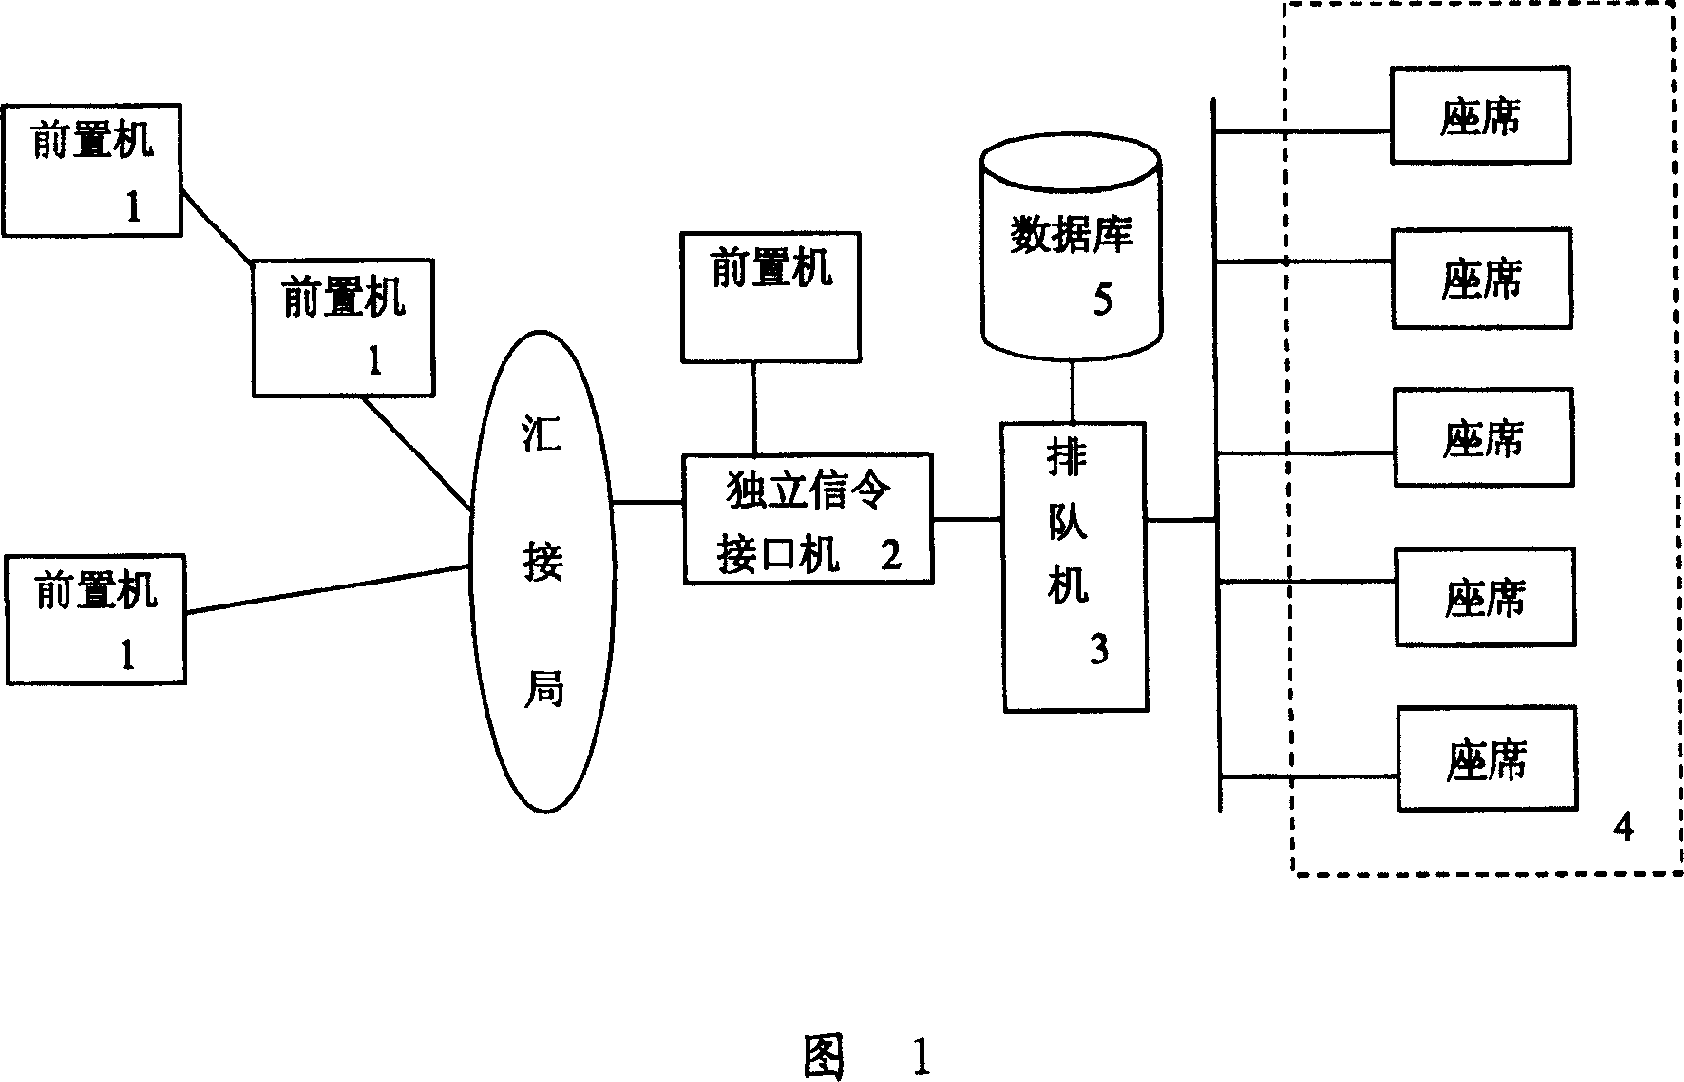 Implementing method for countrywide interconnection system for call center